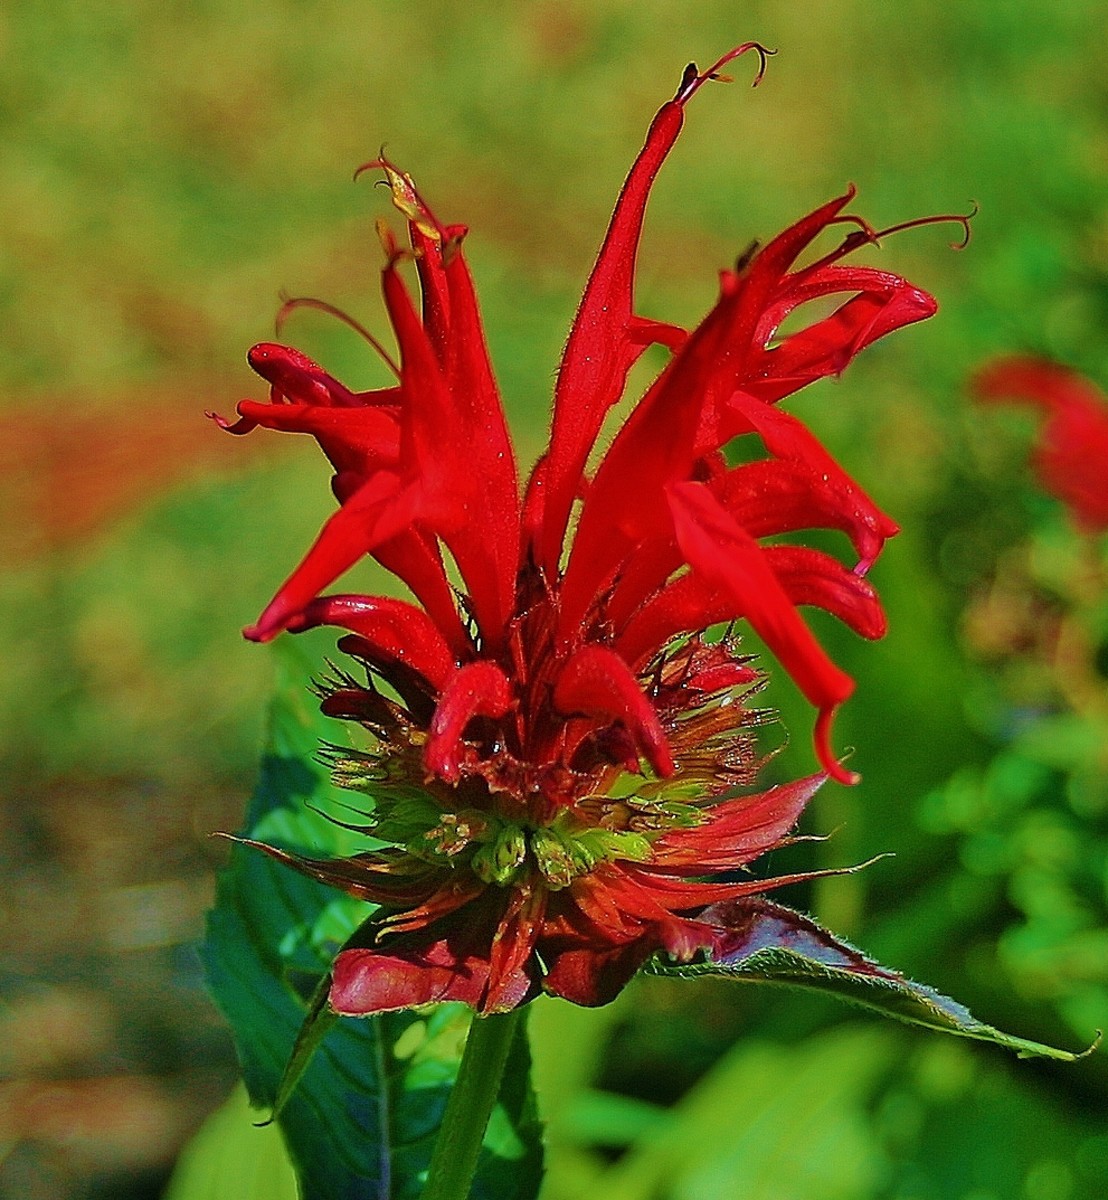 Bergamot (Monarda didyma), which prefers full sun and moist soil, is prone to mildew, a fungal infection that thrives in damp conditions.